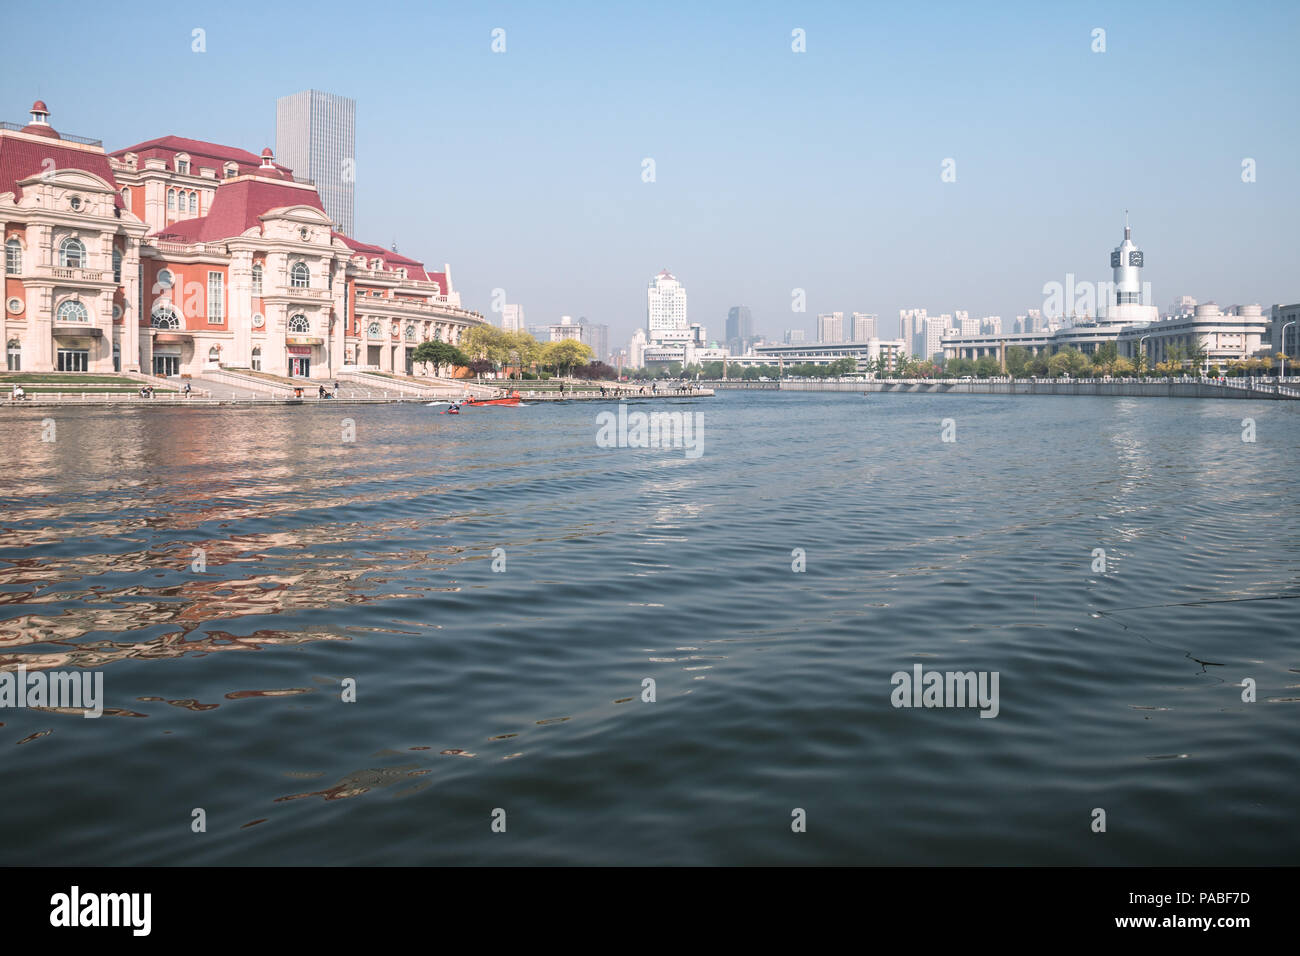 Cityscape of Tianjin, China. The word on the building is: Tianjin Station. Stock Photo